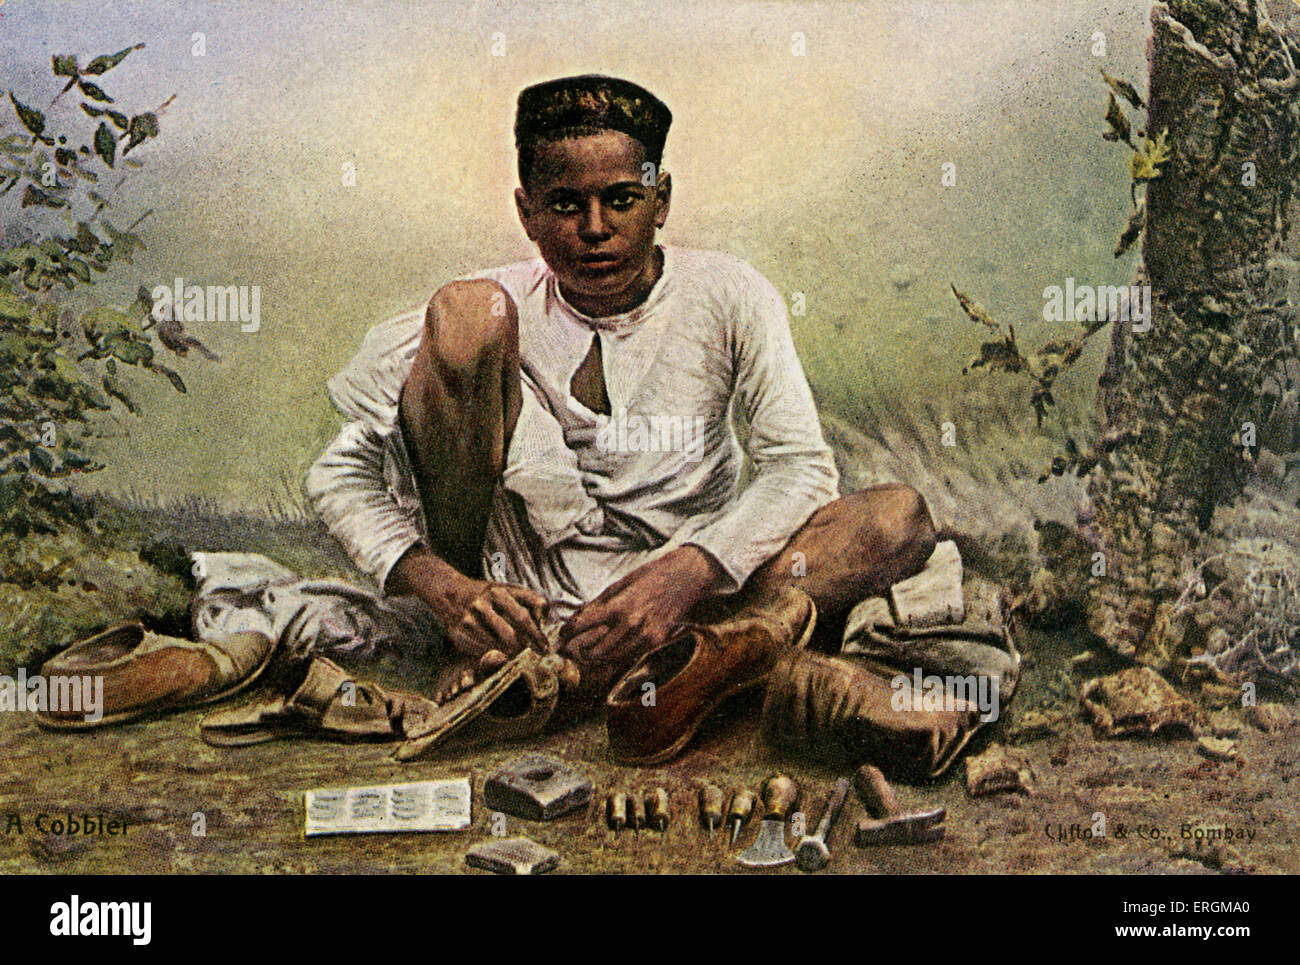 An Indian cobbler. Colorized photograph from early 20th century. Around him are the tools of his trade, including hammers, Stock Photo